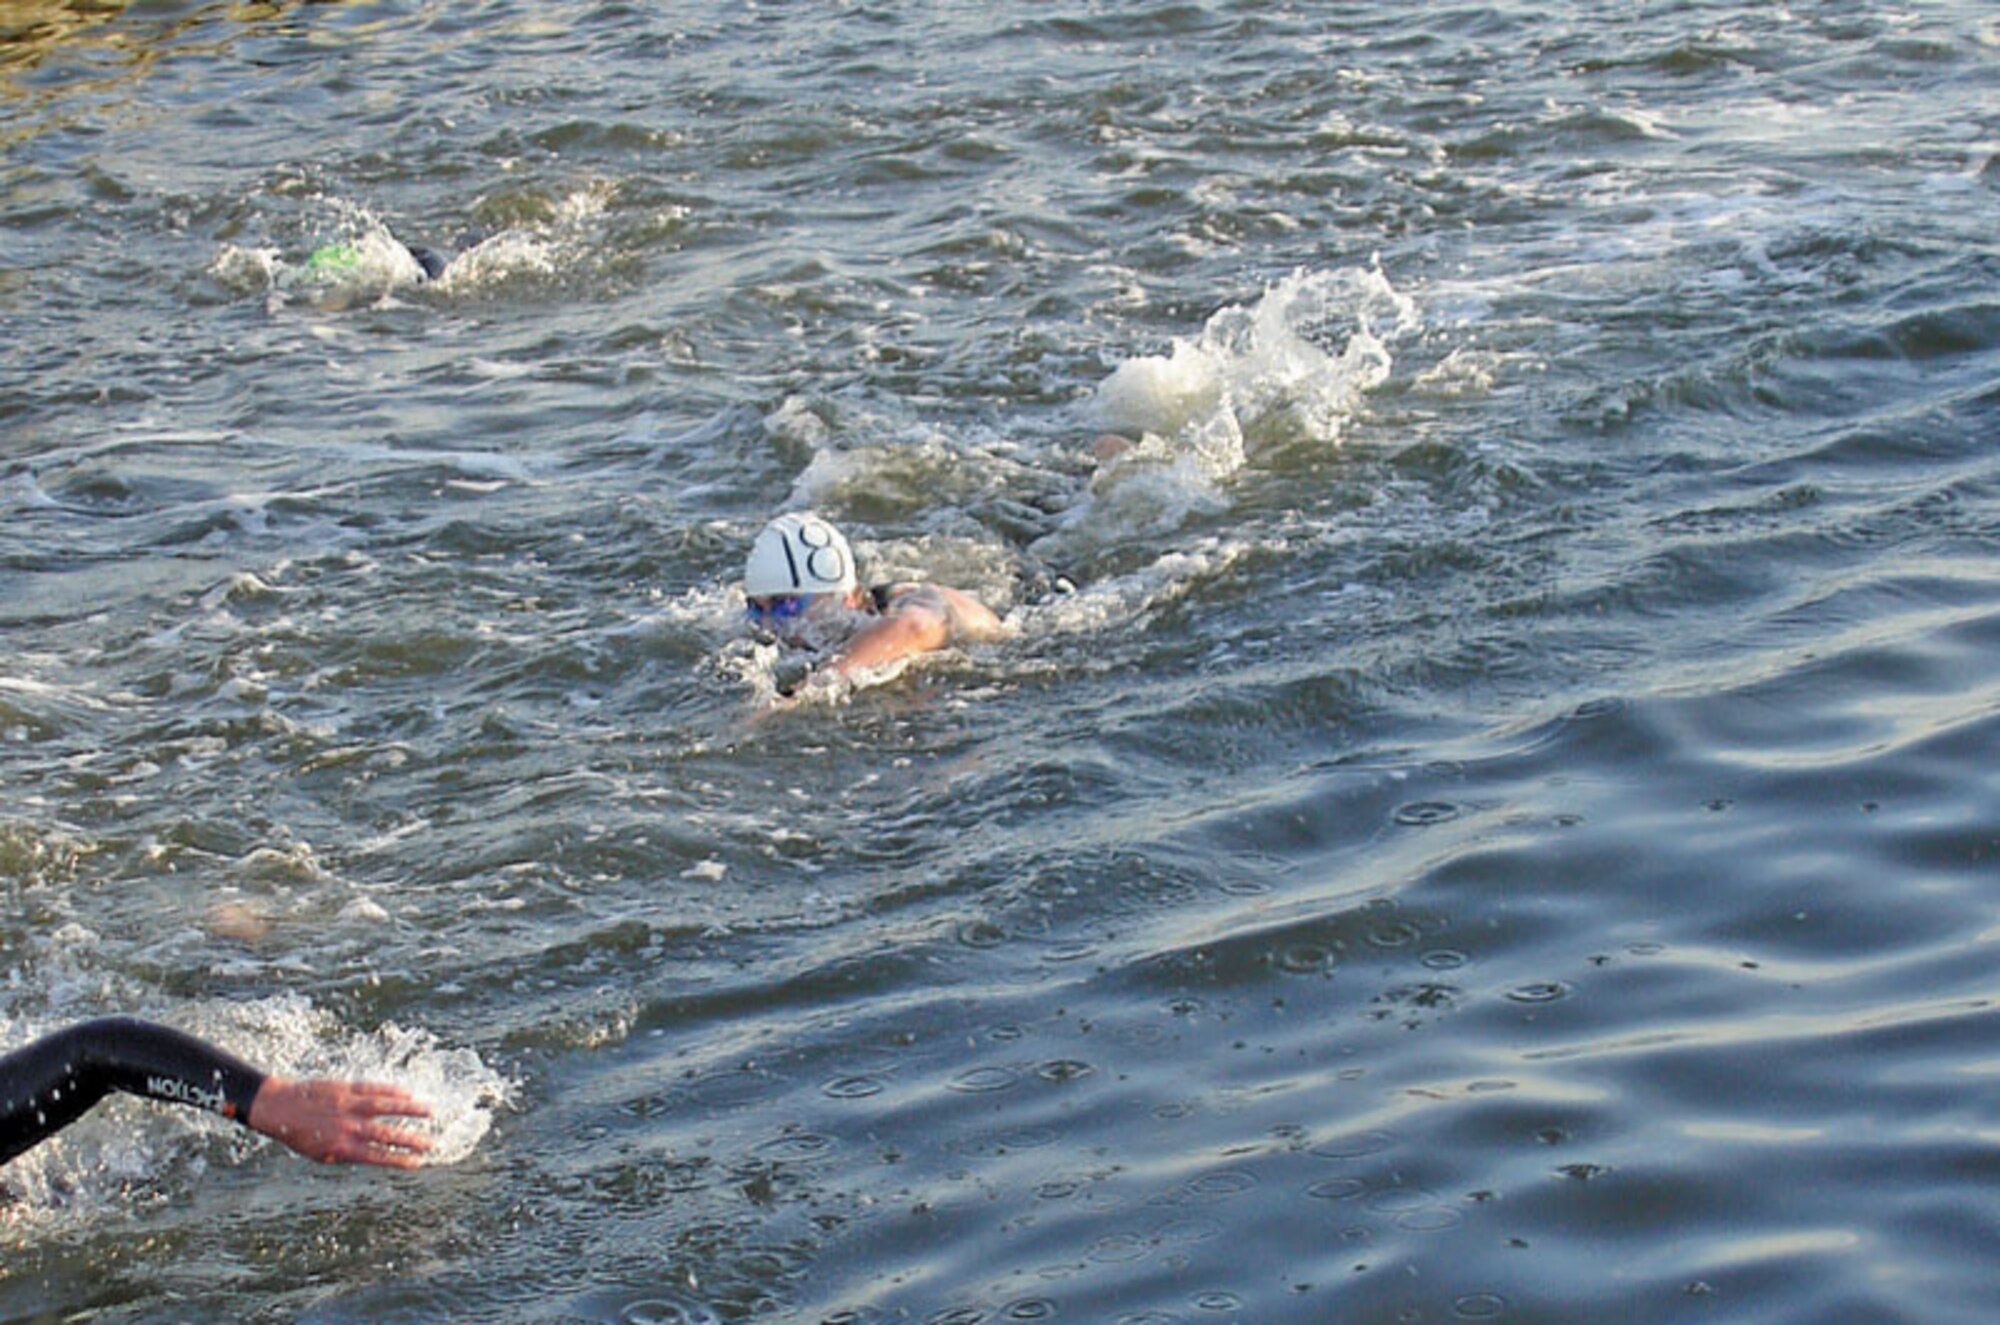 EIELSON AIR FORCE BASE, Ak.—1st Lt. Benjamin Bishop, 354th Operations Support Squadron intelligence flight, slices through the water during his 2.4 mile swim portion of the ChesapeakeMan Ultra Distance Triathlon Sept. 30 in Cambridge, Md. (Courtesy photo)